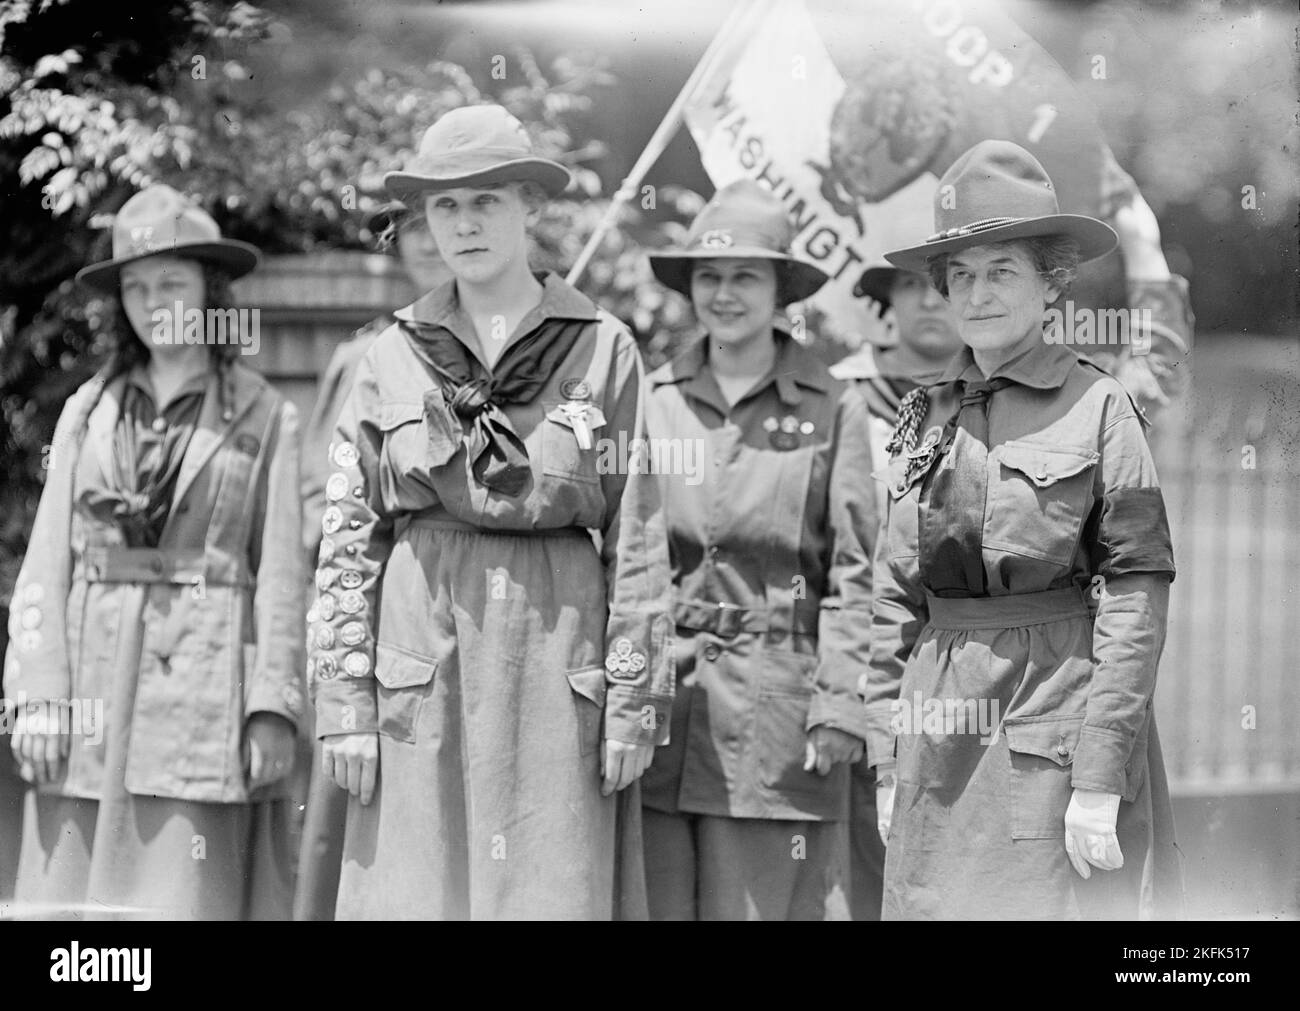 Girl Scouts - Troop #1. Mrs. Juliette Low, Founder, Right; Elenore Putsske, Center; Evaline Glance, 2nd from Right, 1917. Stock Photo